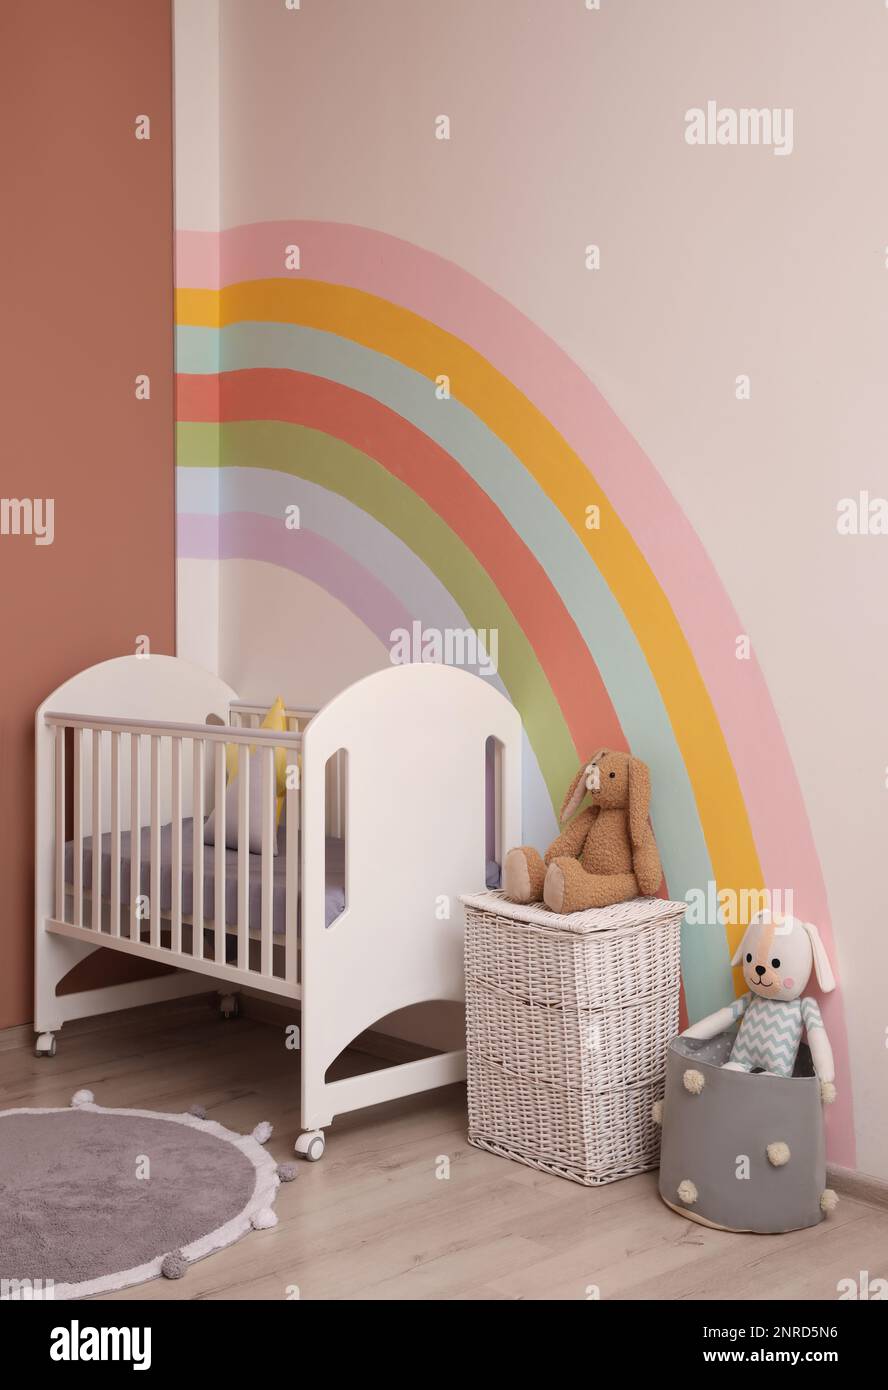 Cute child's room interior with beautiful rainbow painted on wall Stock Photo